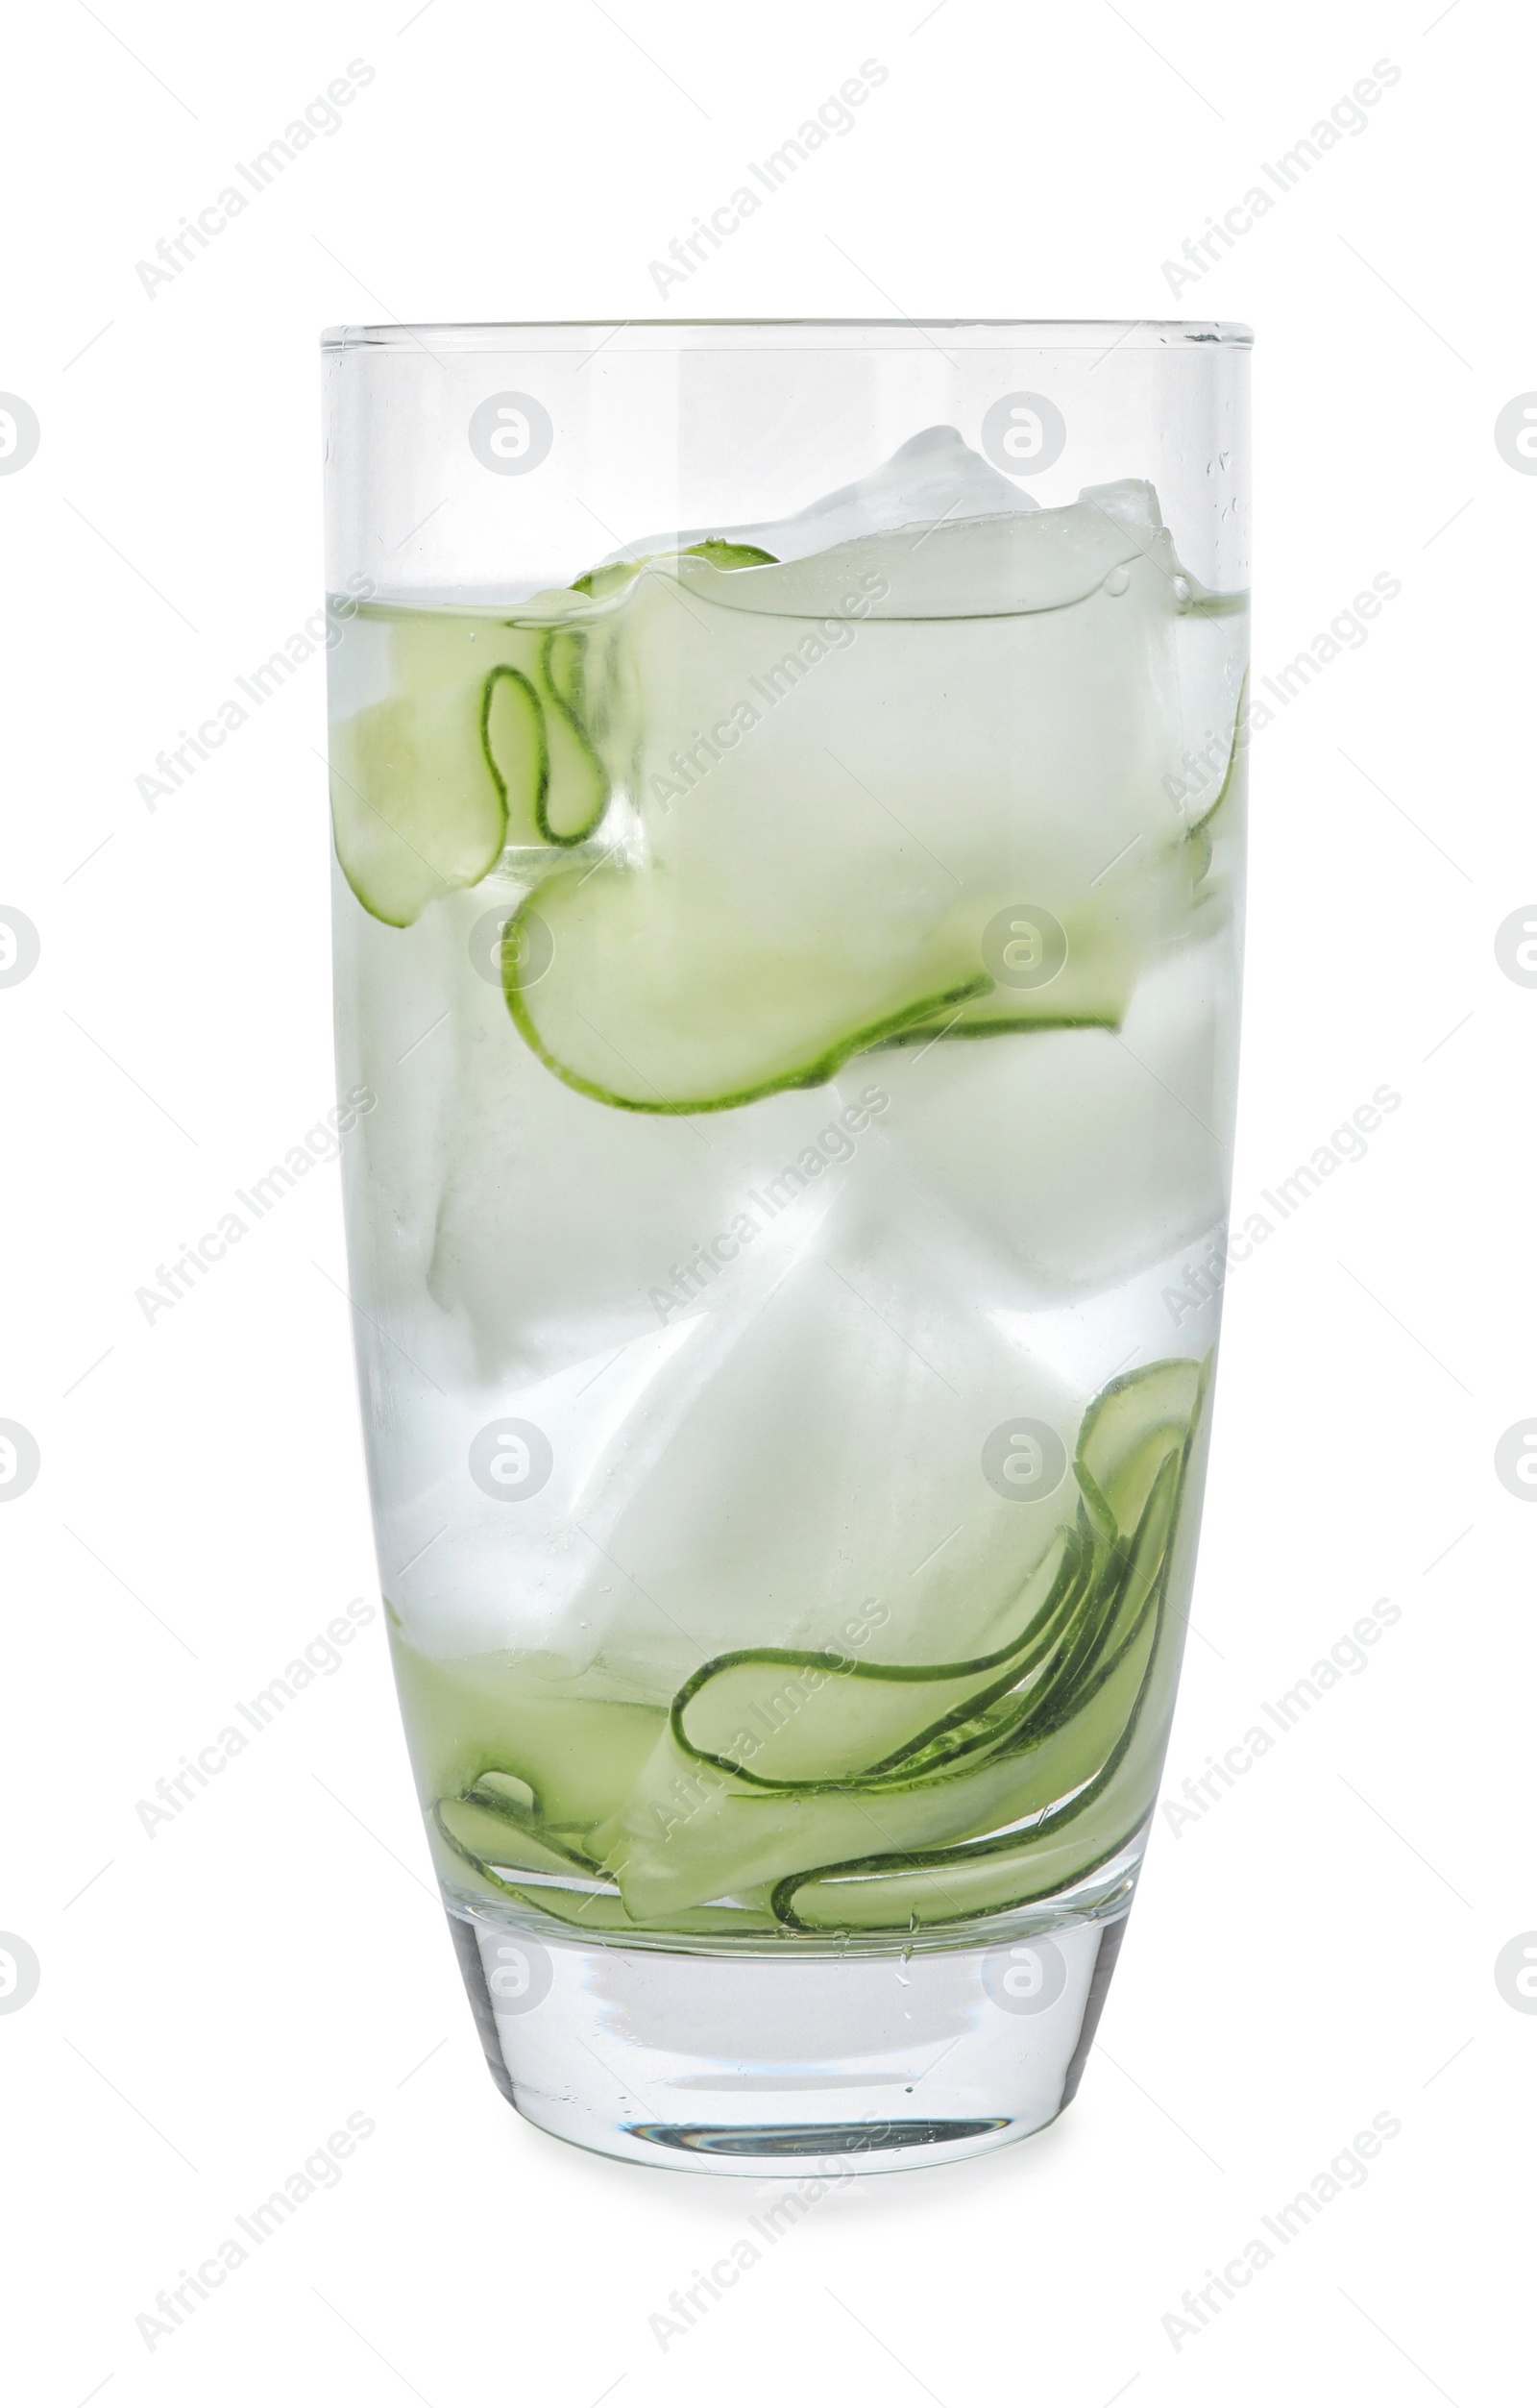 Photo of Glass of refreshing drink with cucumber slices on white background